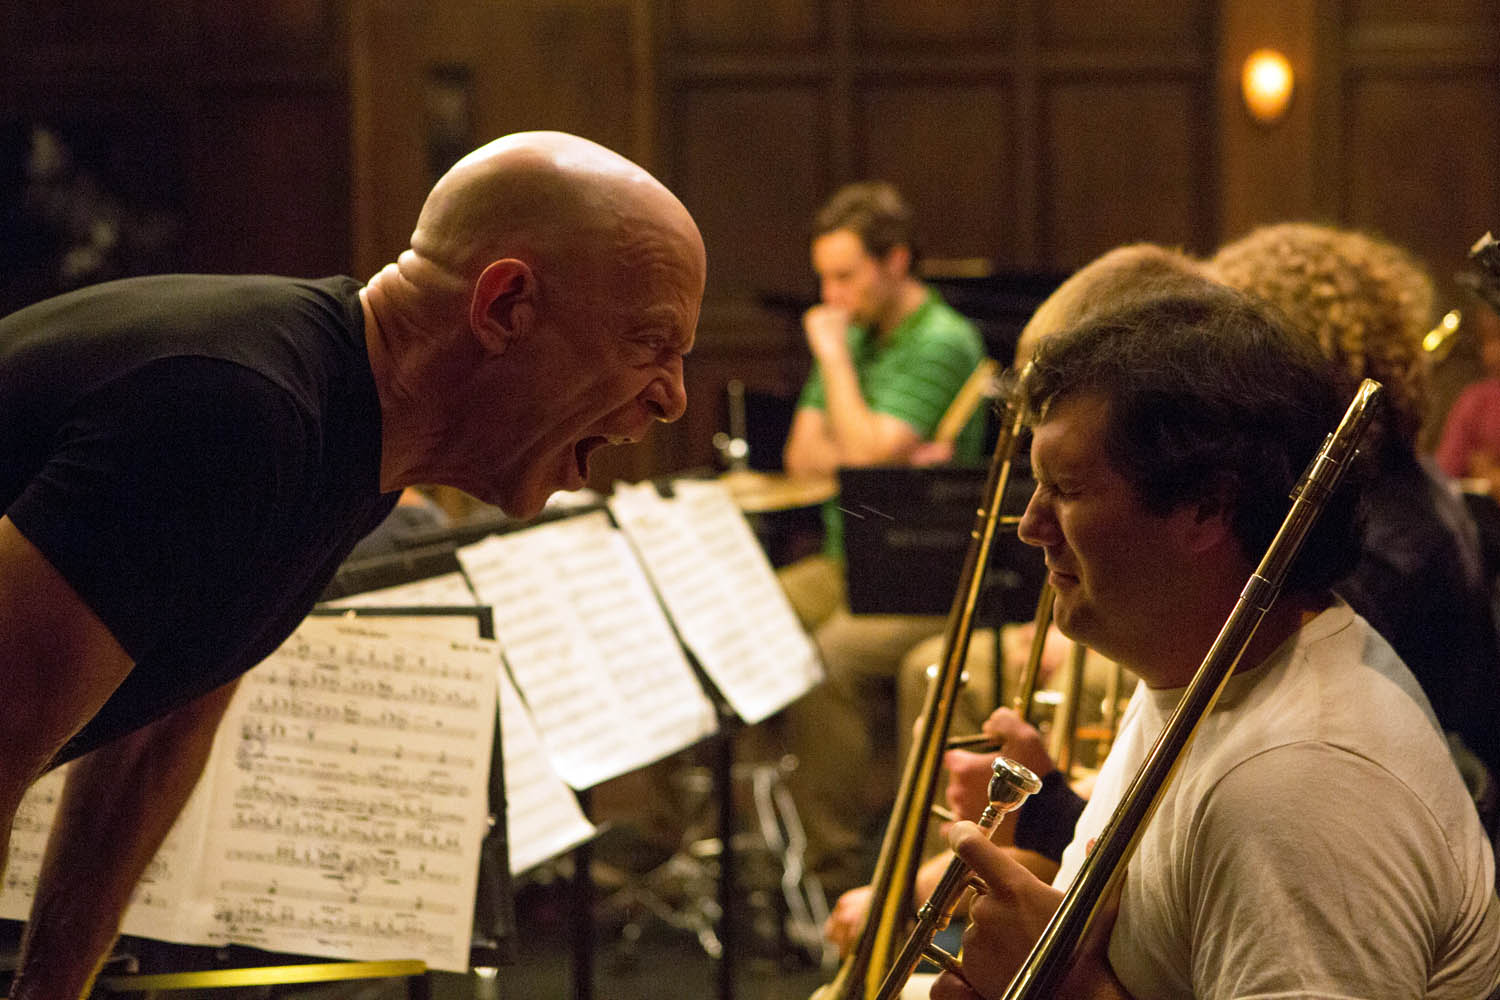 JK Simmons as Fletcher in "Whiplash" (2014). (Sony Pictures Classics/TNS)